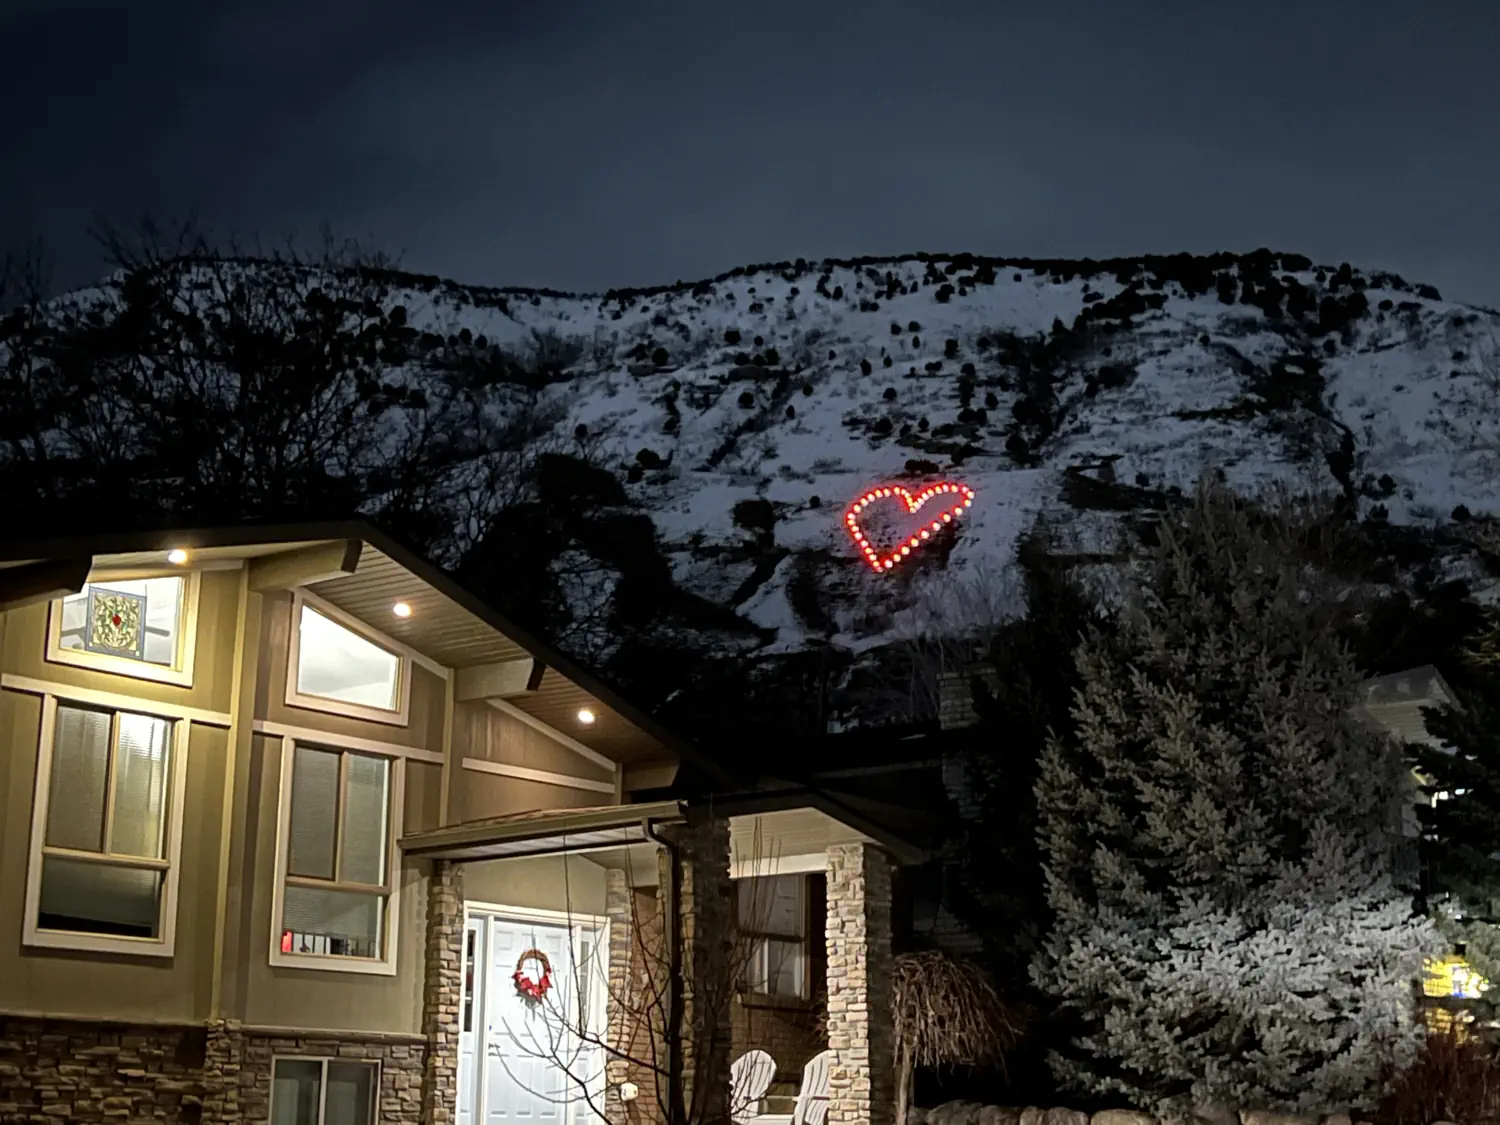 A giant, light-up heart display on the mountain in Pleasant Grove, UT